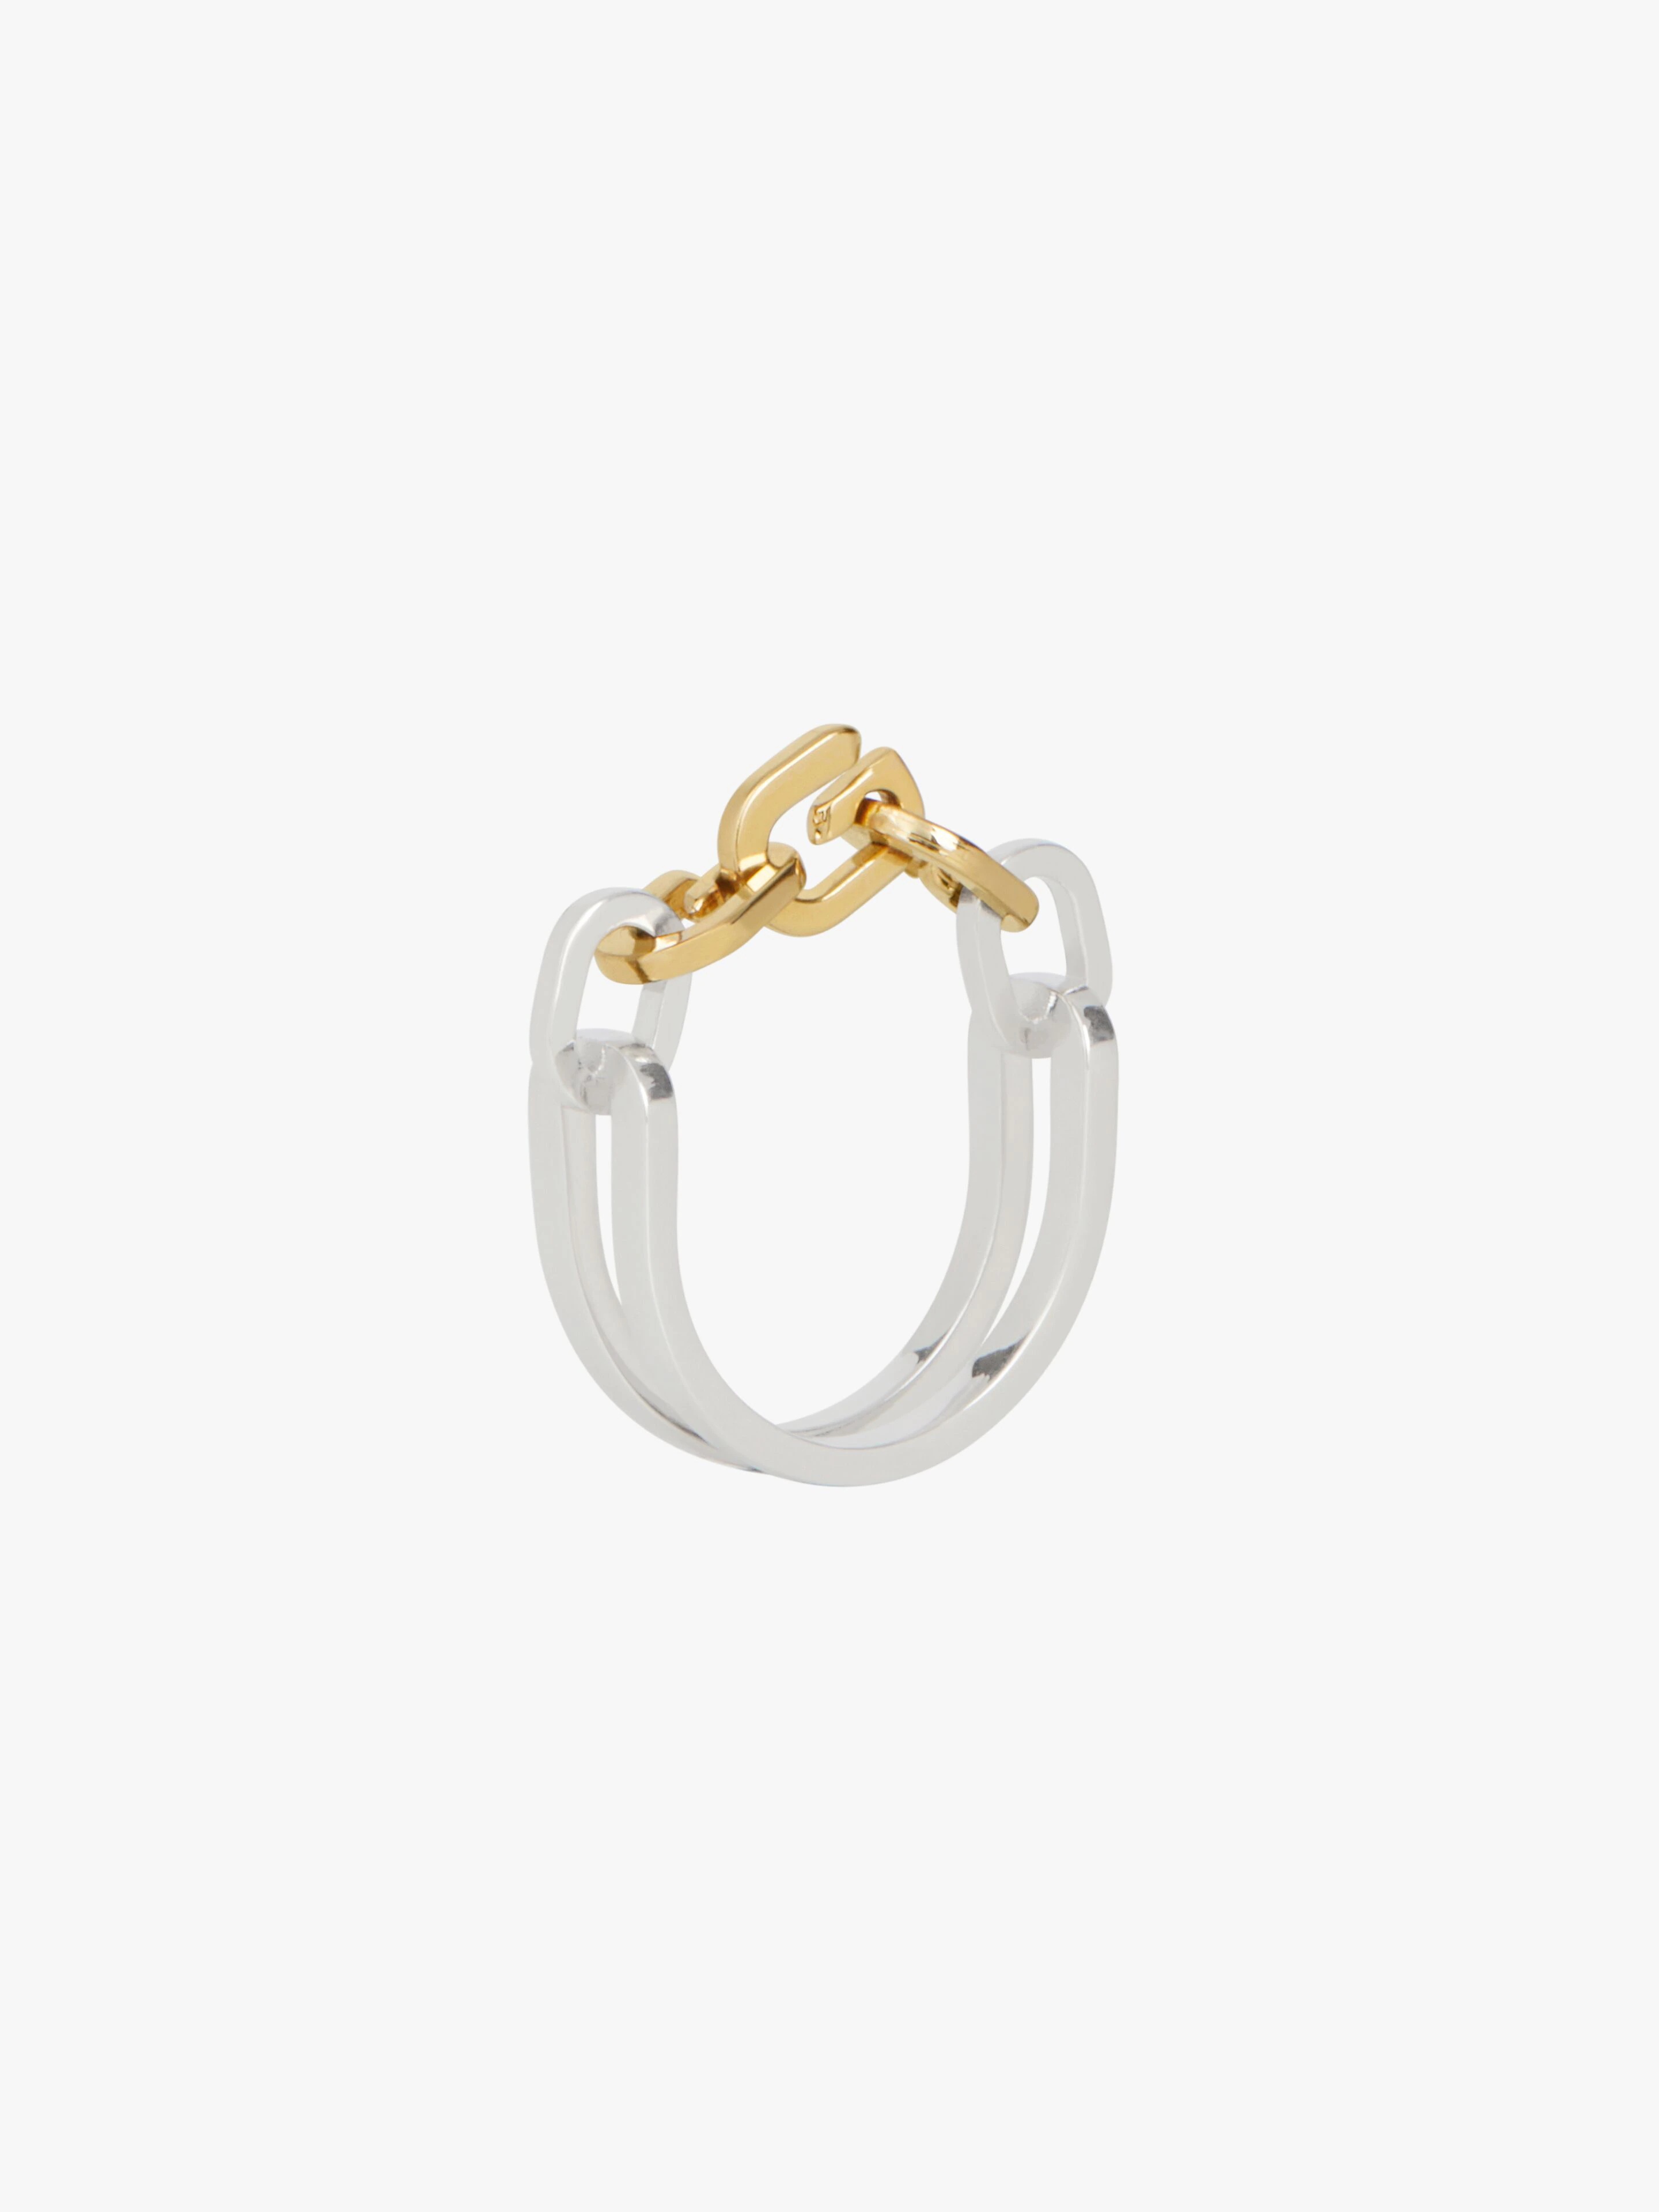 G LINK TWO TONE RING - 5